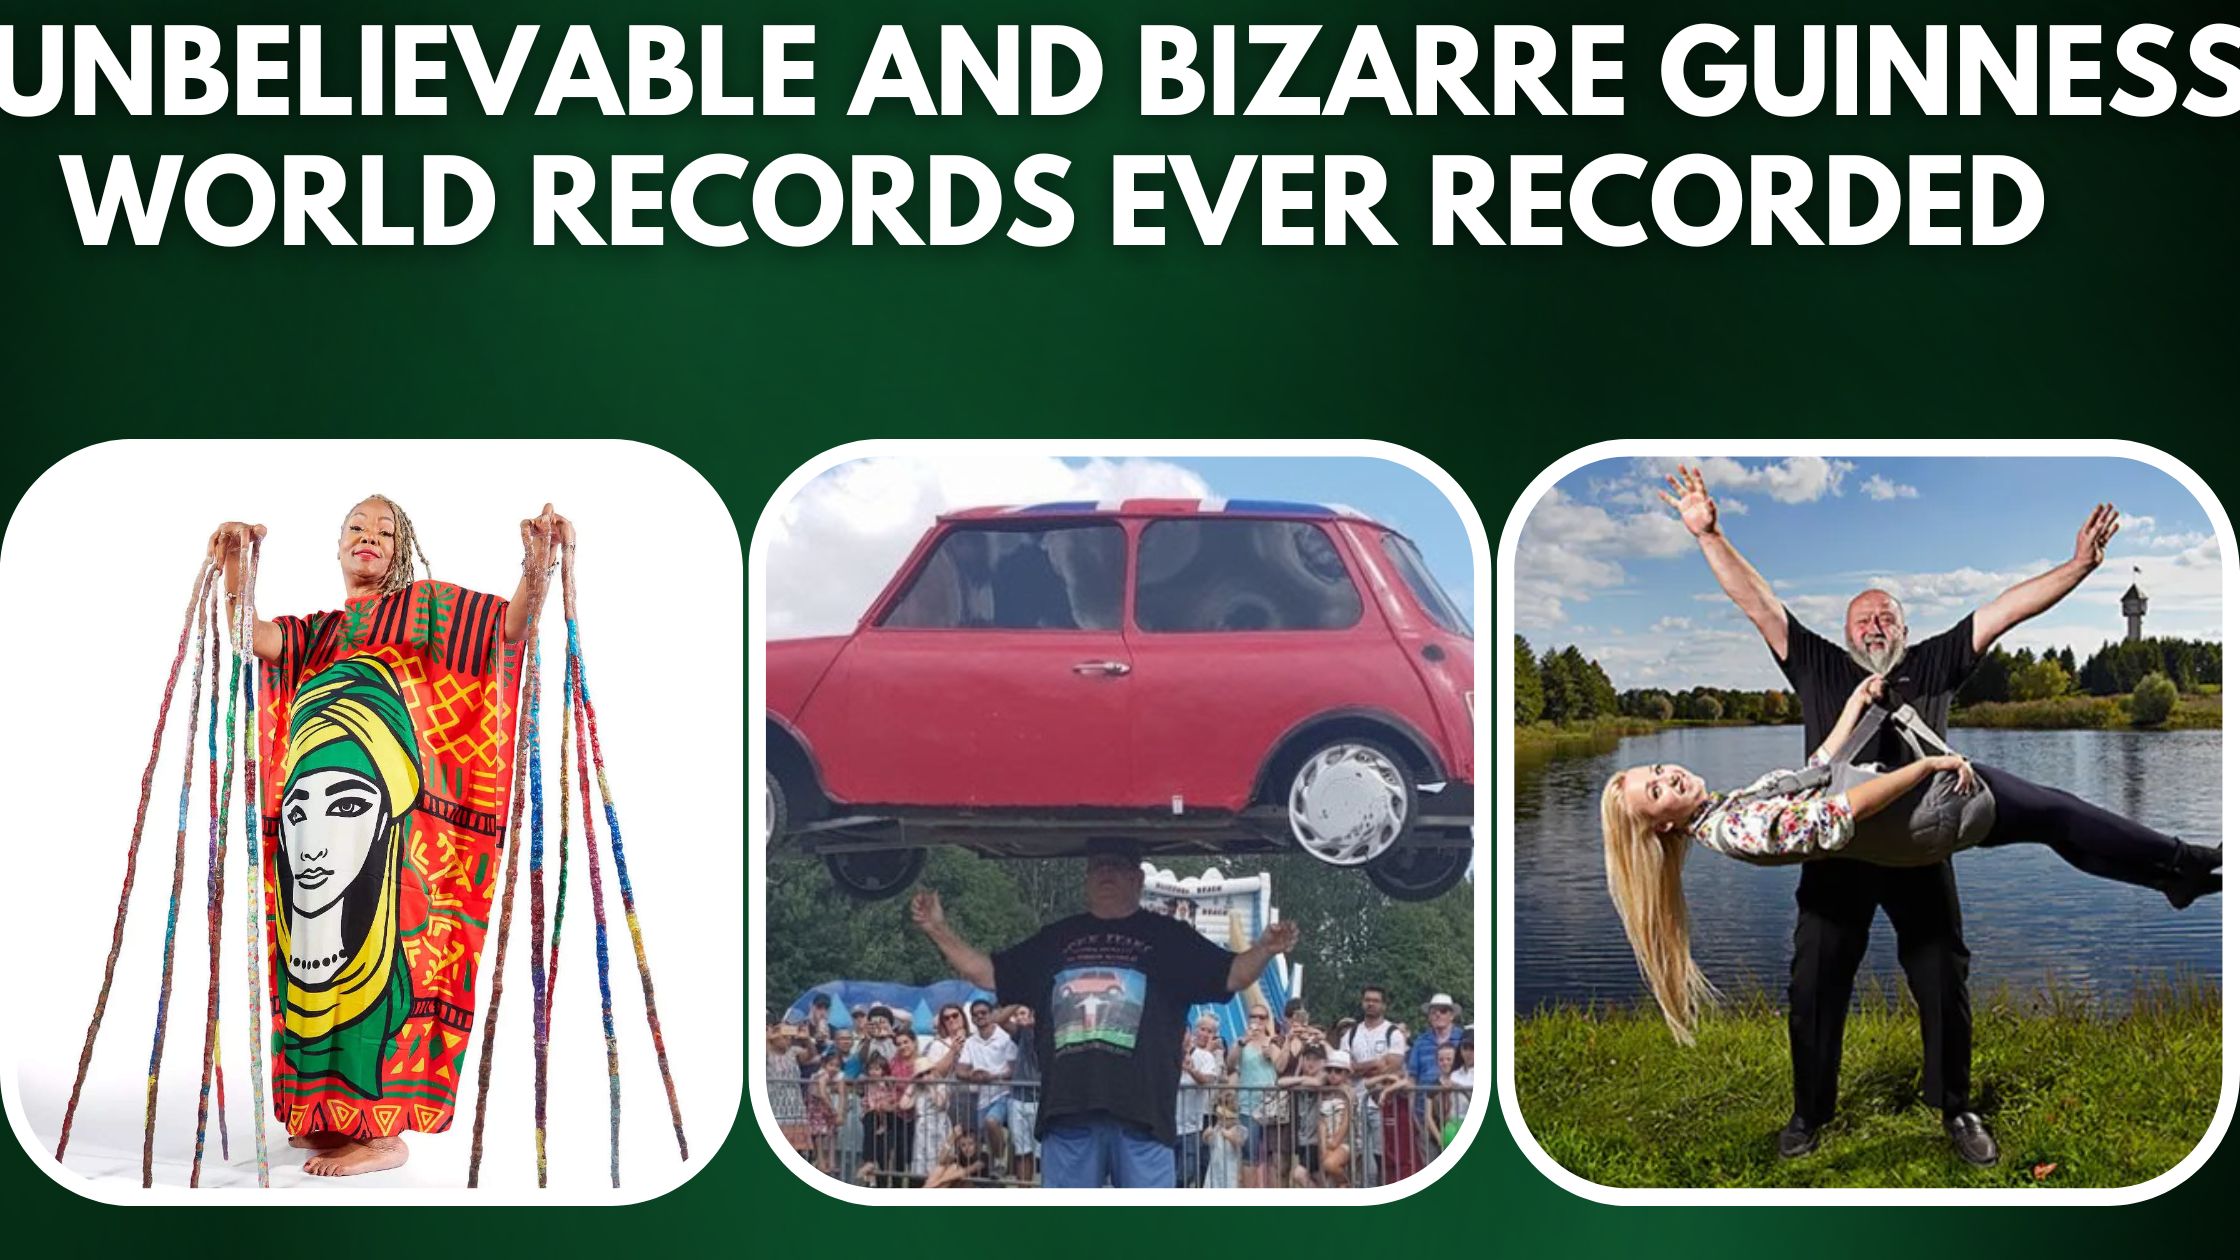 Most Unbelievable and Bizarre Guinness World Records Ever Recorded